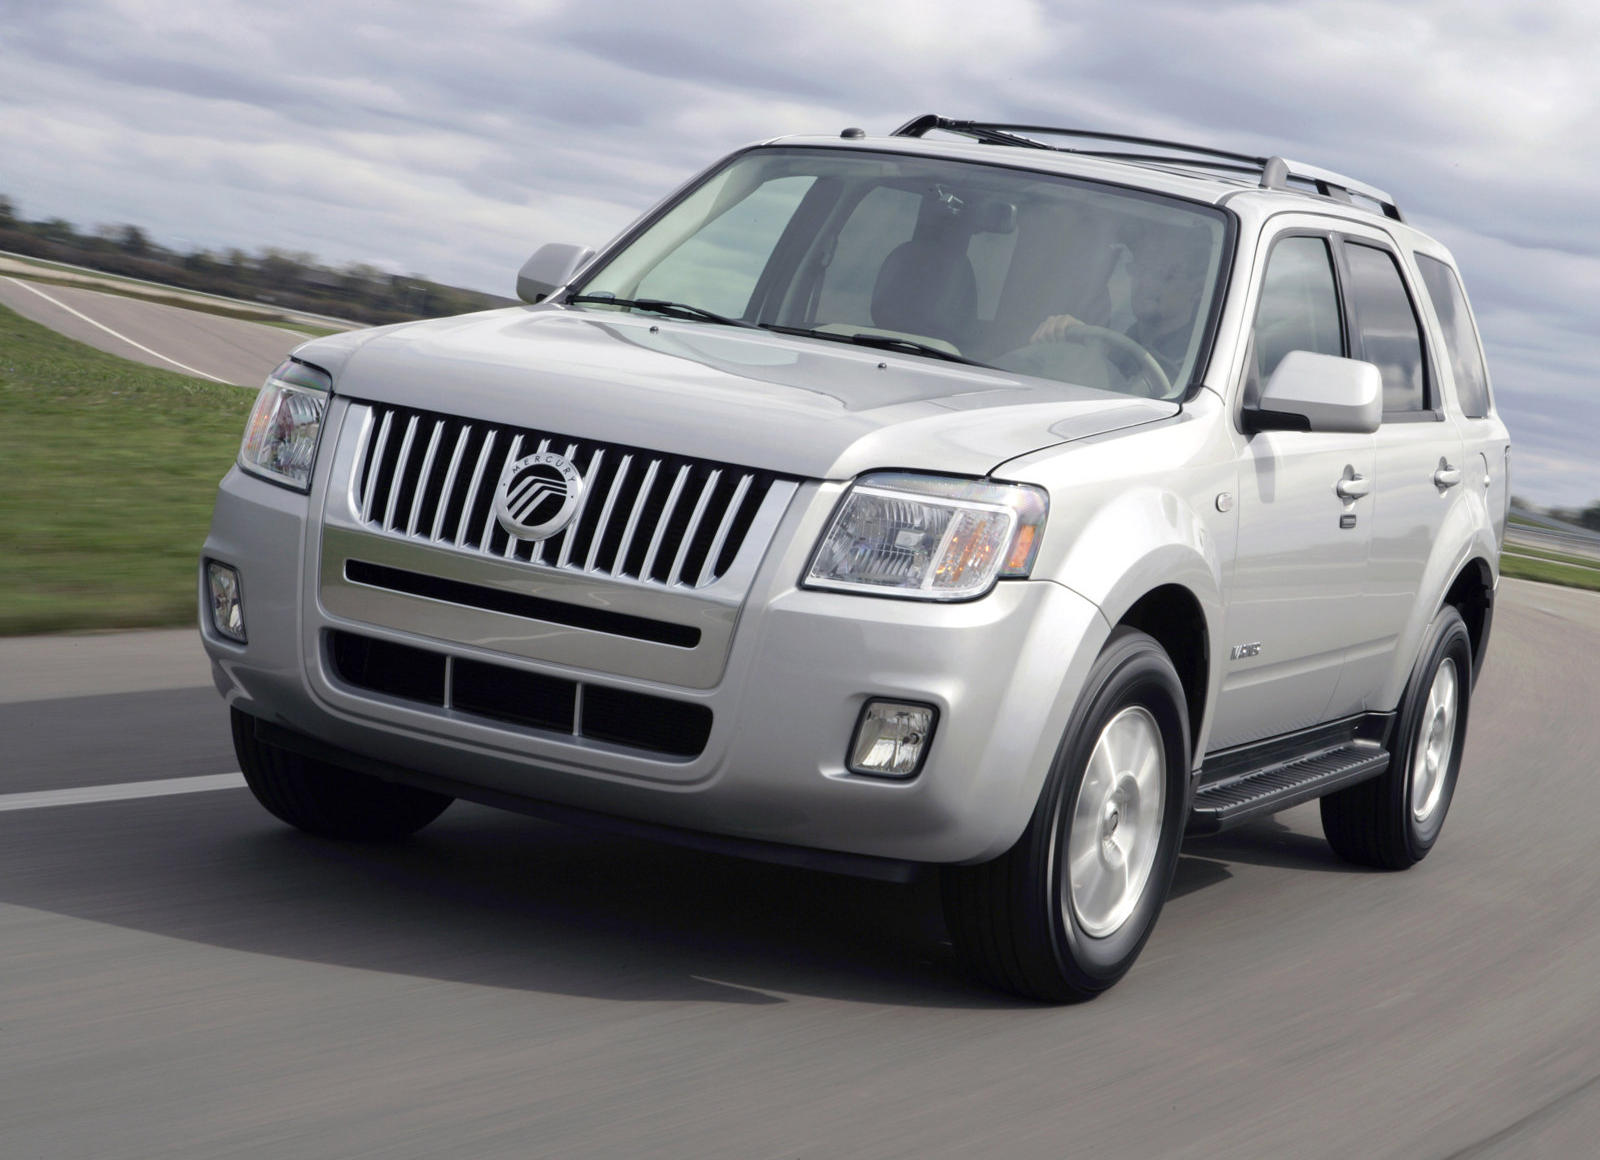 2010 Mercury Mariner Front View Driving